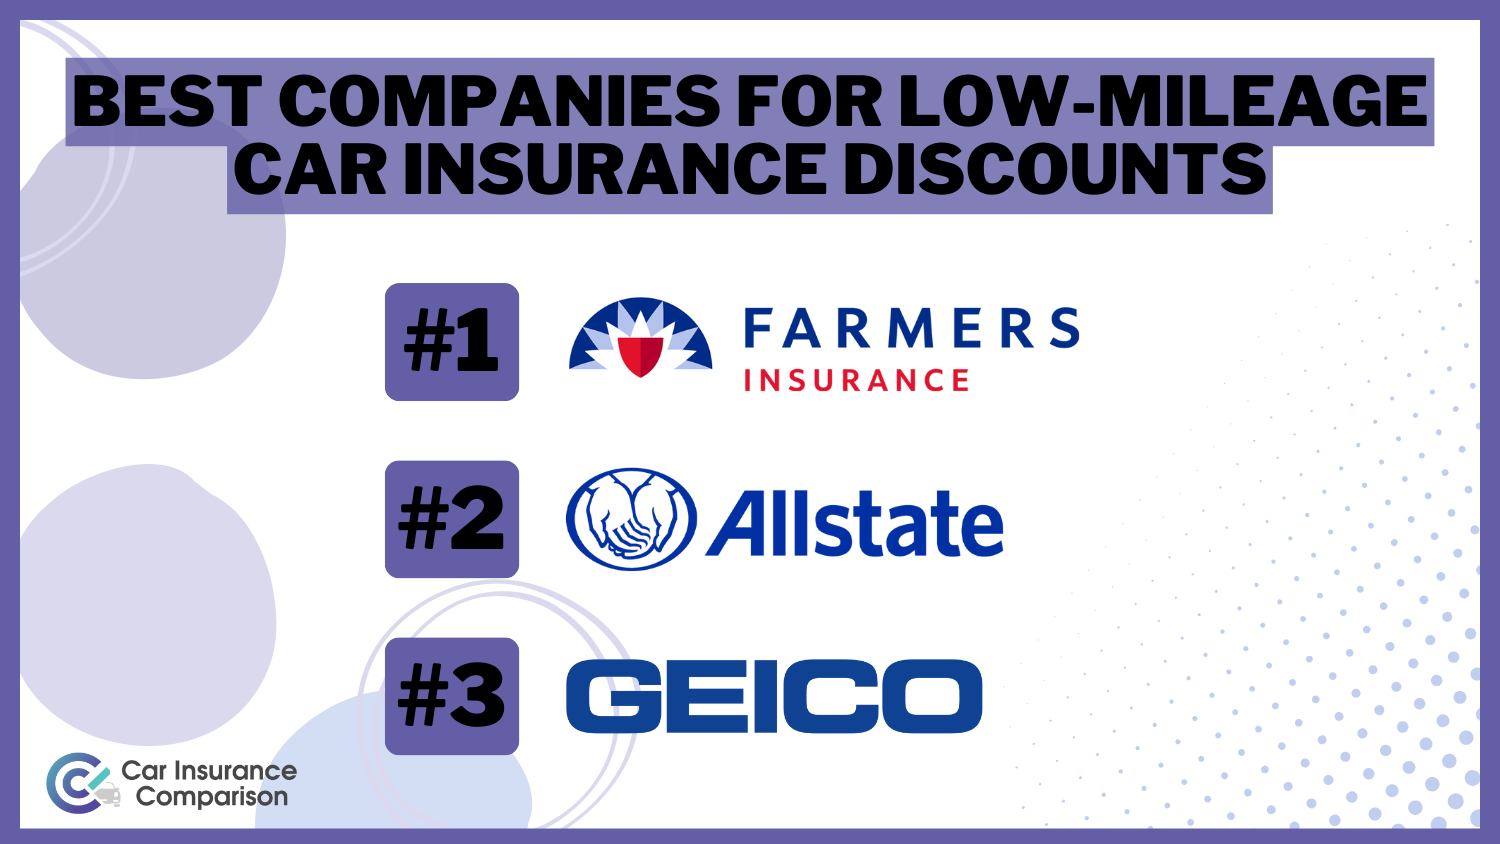 The Best Companies for Low-Mileage Car Insurance Discounts : Farmers, Allstate and Geico